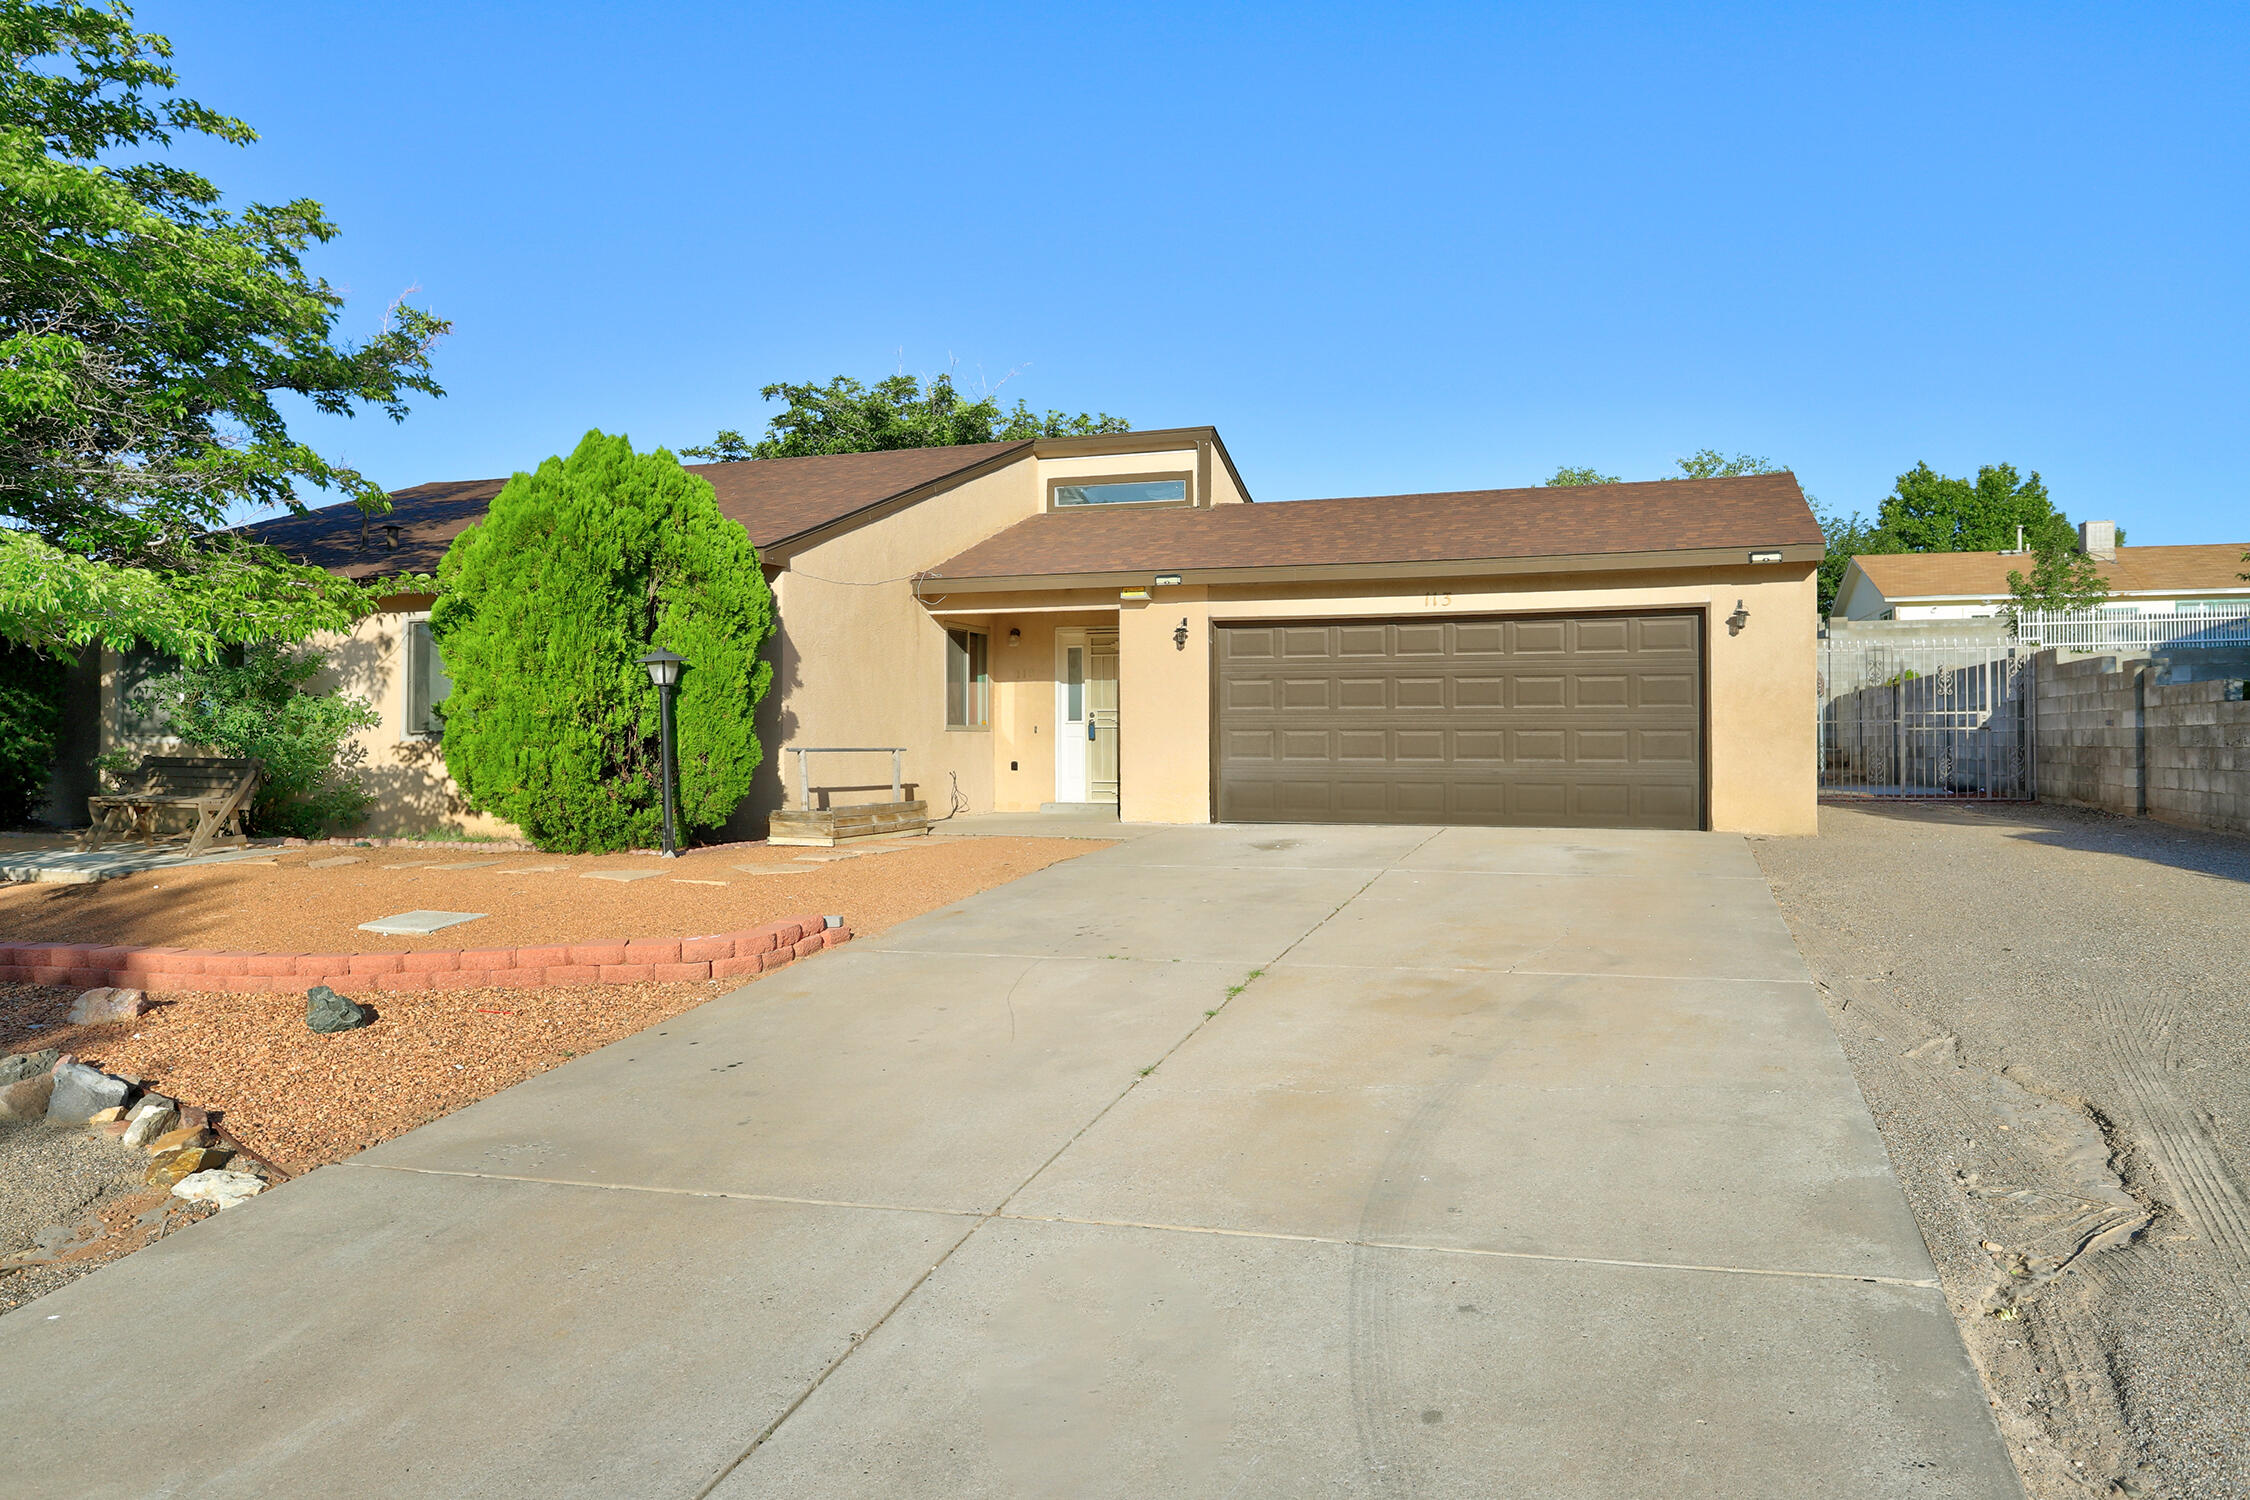 Coming soon. Beautiful 3 bed 2 bath located 5 minutes from Rio Rancho High. Updated inside. Large backyard, refrigerated air and more.Schedule your showing today!